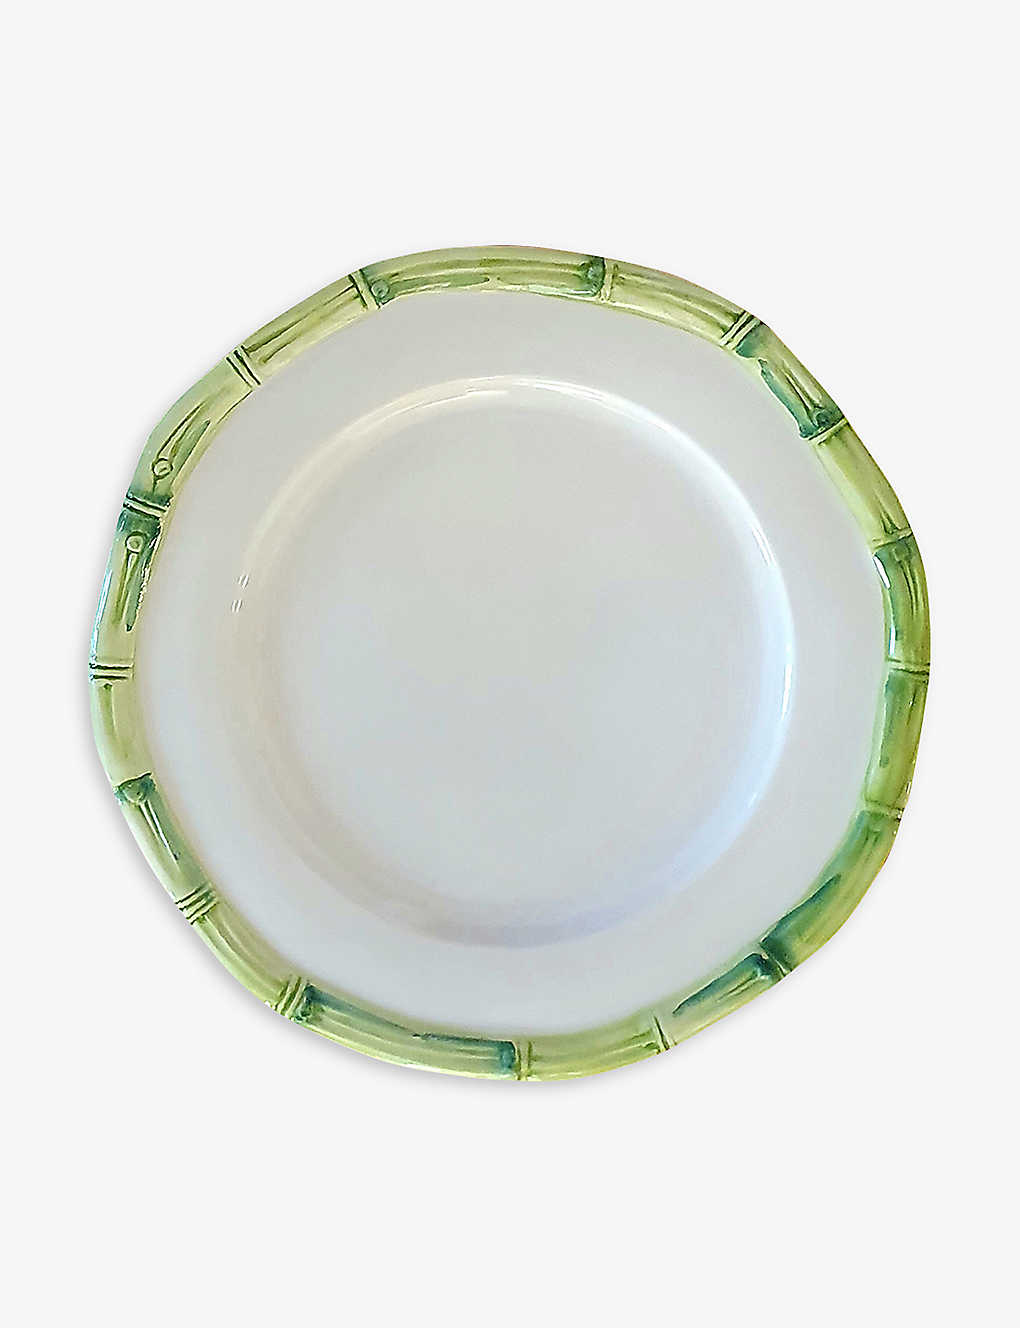 Les Ottomans Green Bamboo Hand-painted Ceramic Salad Plate 21cm